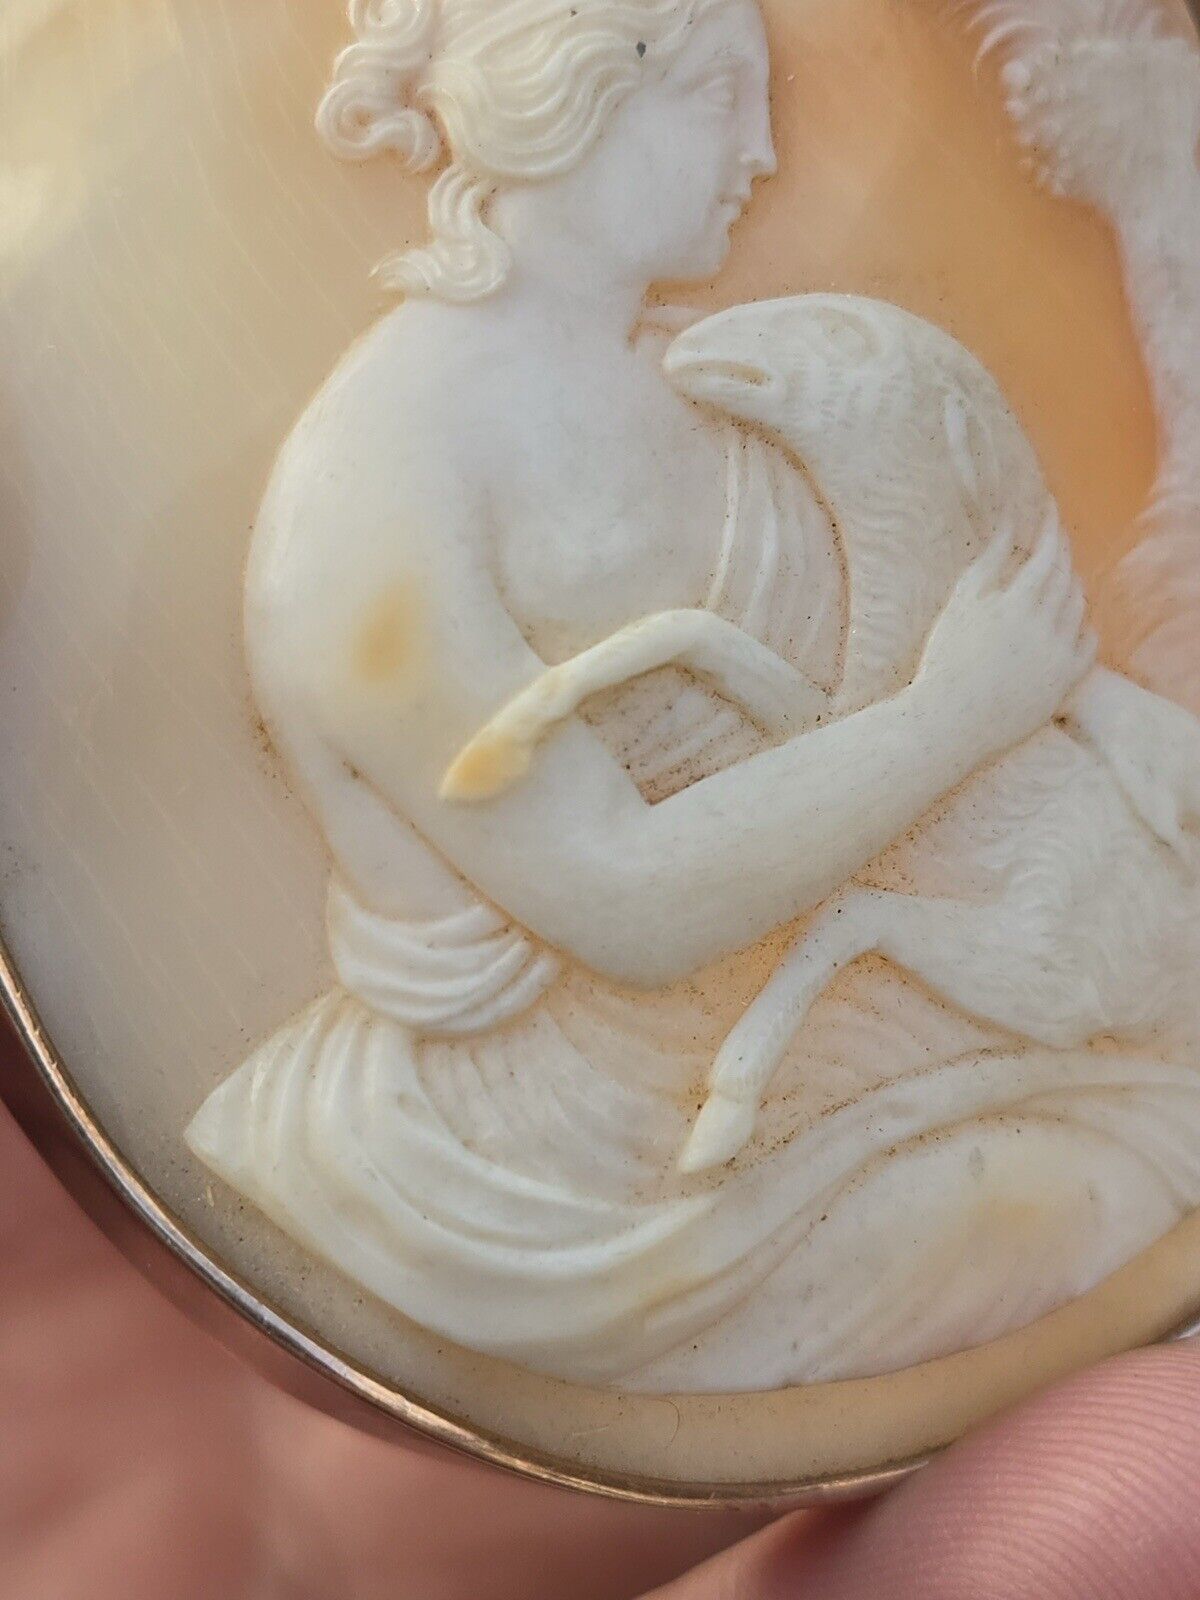 Exceptional Quality 14K Yellow Gold Cameo Brooch With Superb Carving